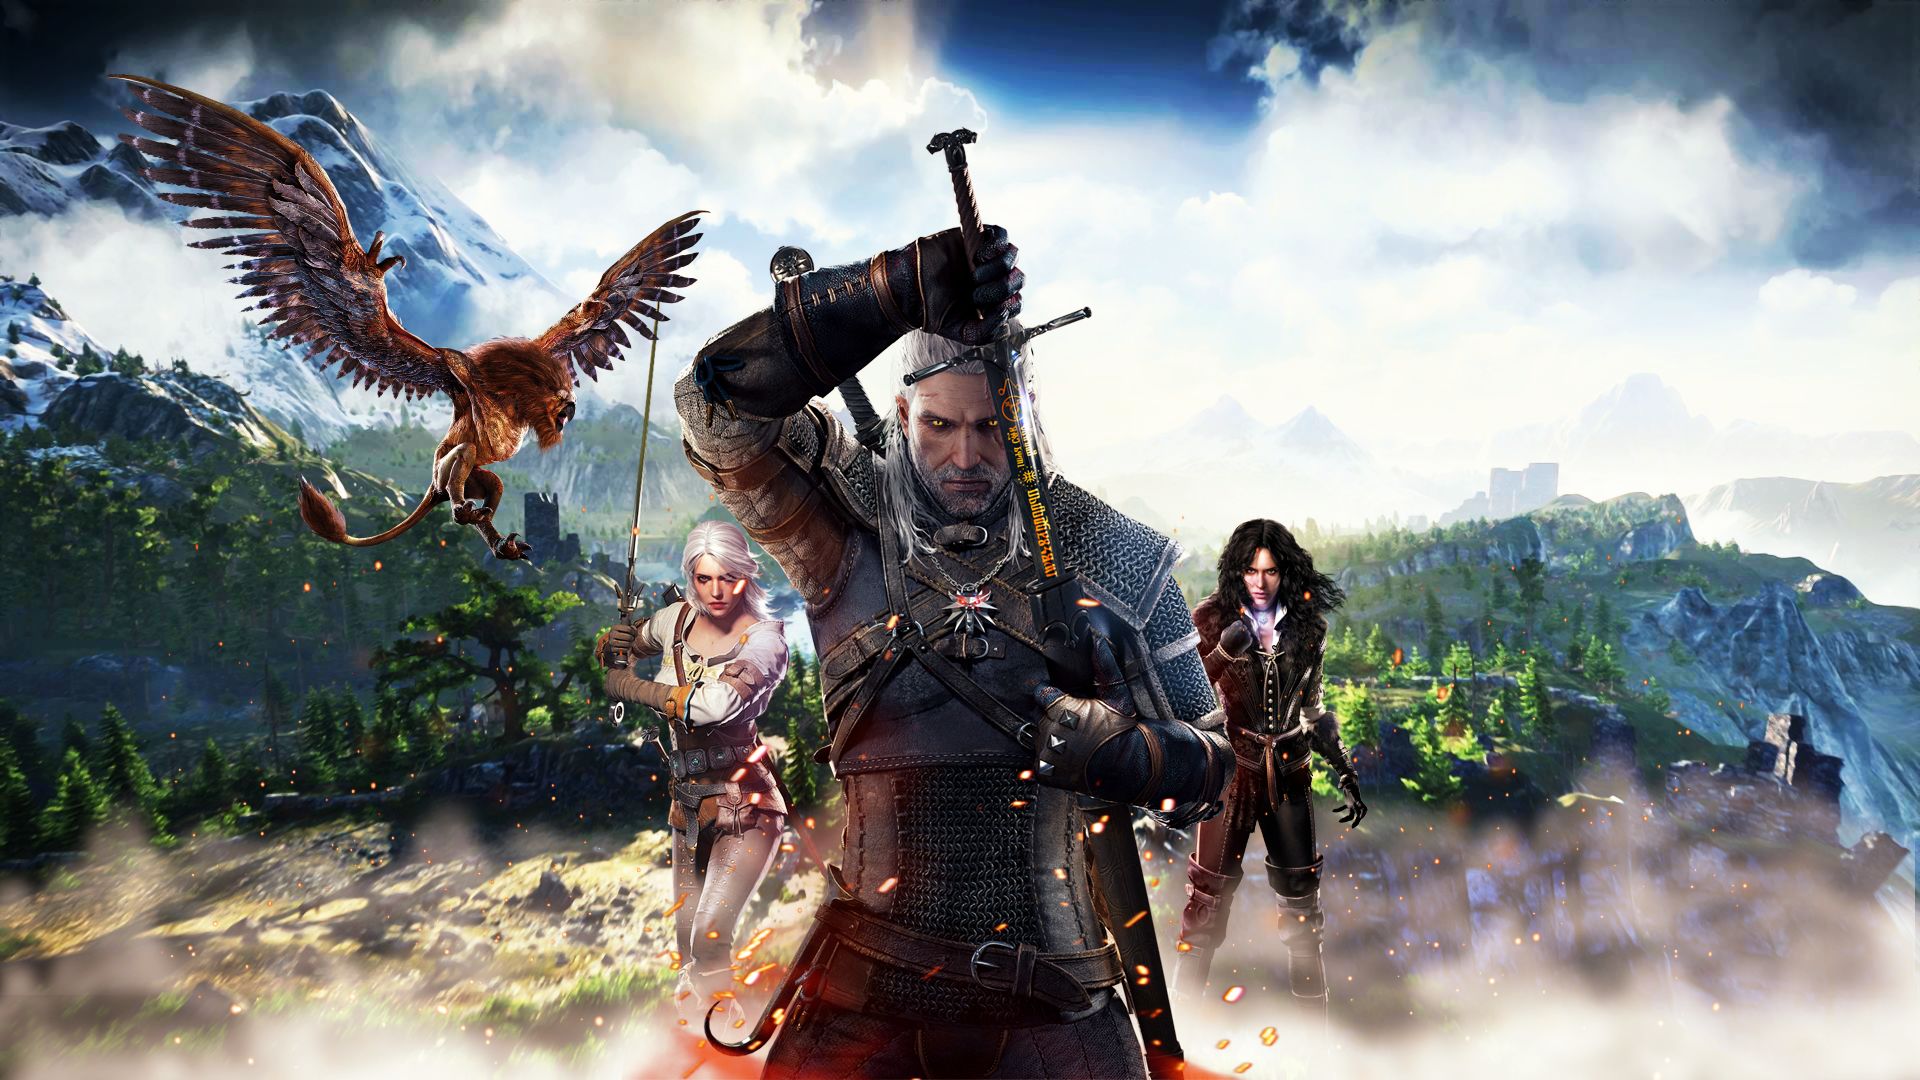 yennefer of vengerberg, the witcher, ciri (the witcher), video game, the witcher 3: wild hunt, geralt of rivia